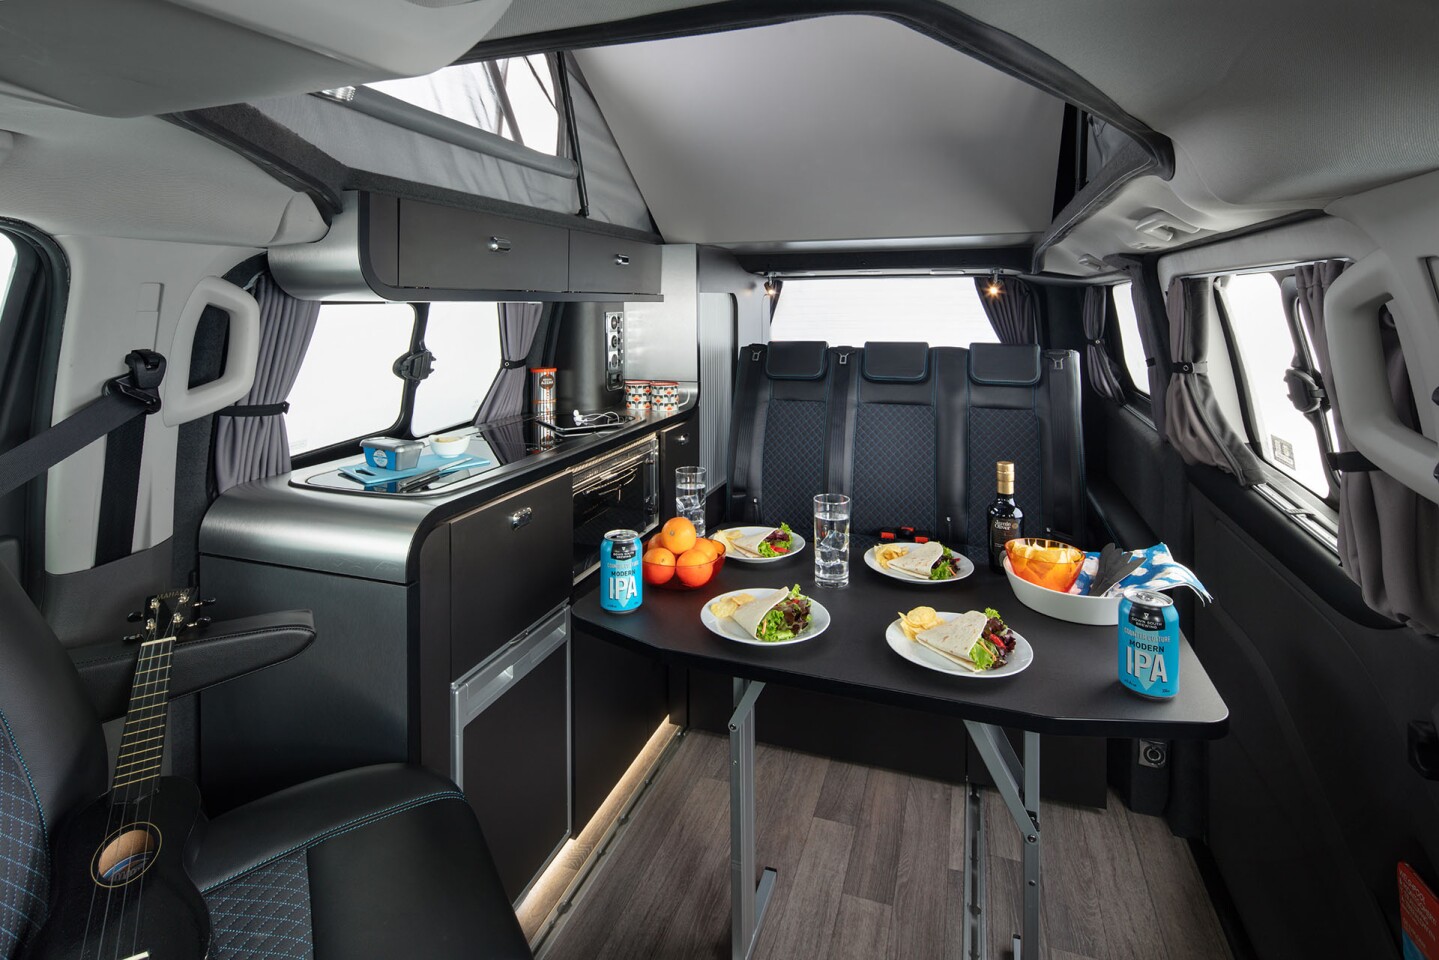 The two-legged removable table appears larger than the tables in many small camper vans, offering space for everyone to dine together